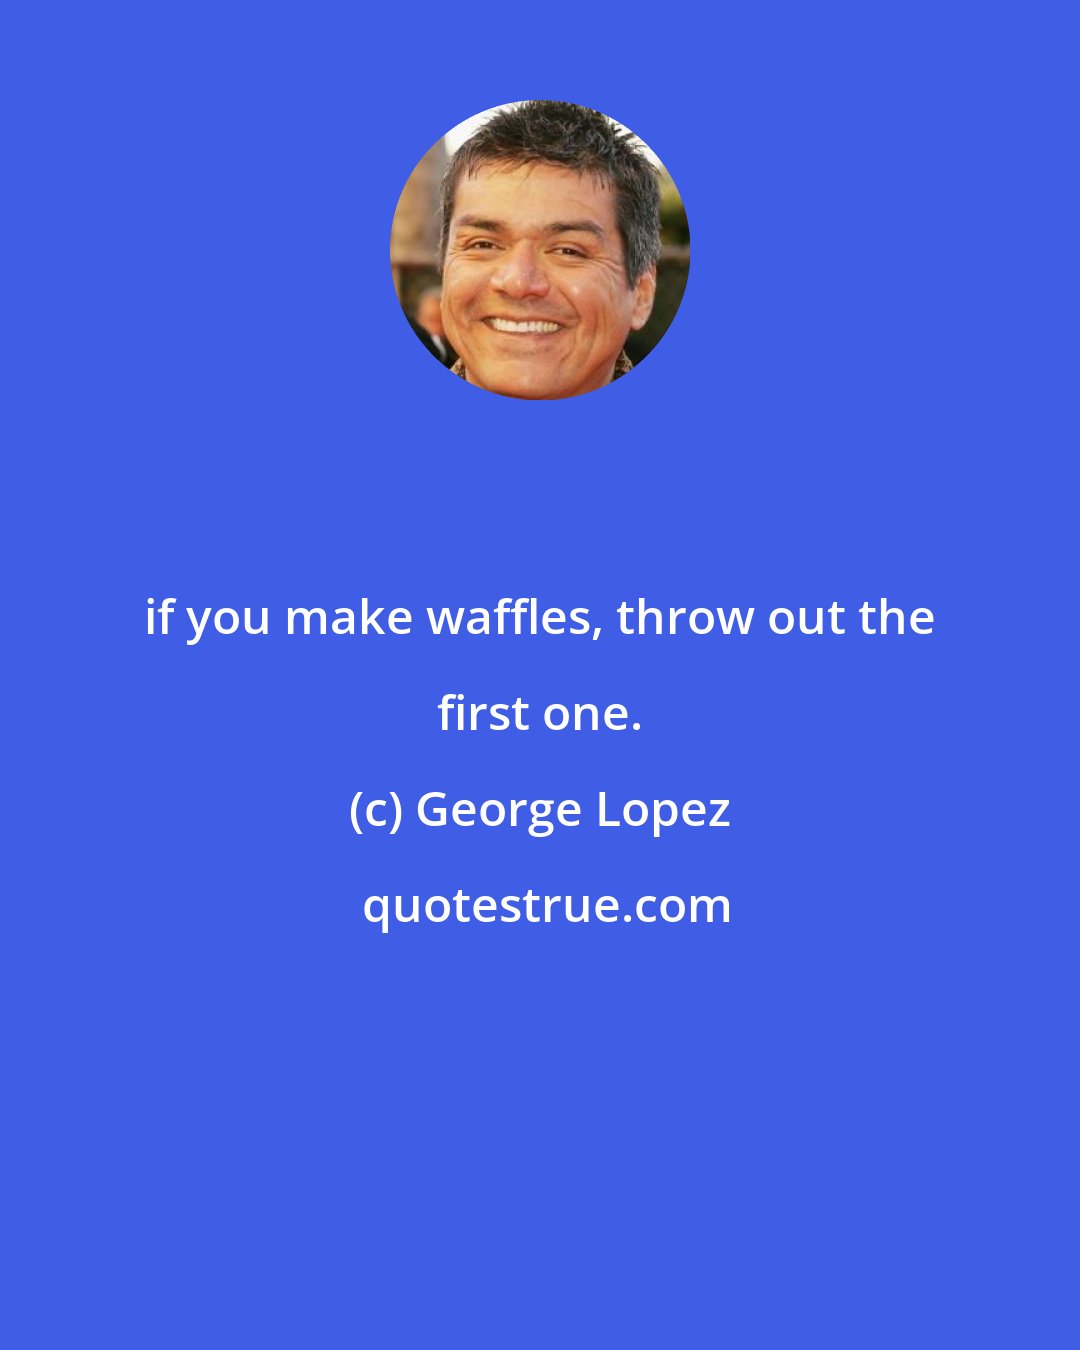 George Lopez: if you make waffles, throw out the first one.